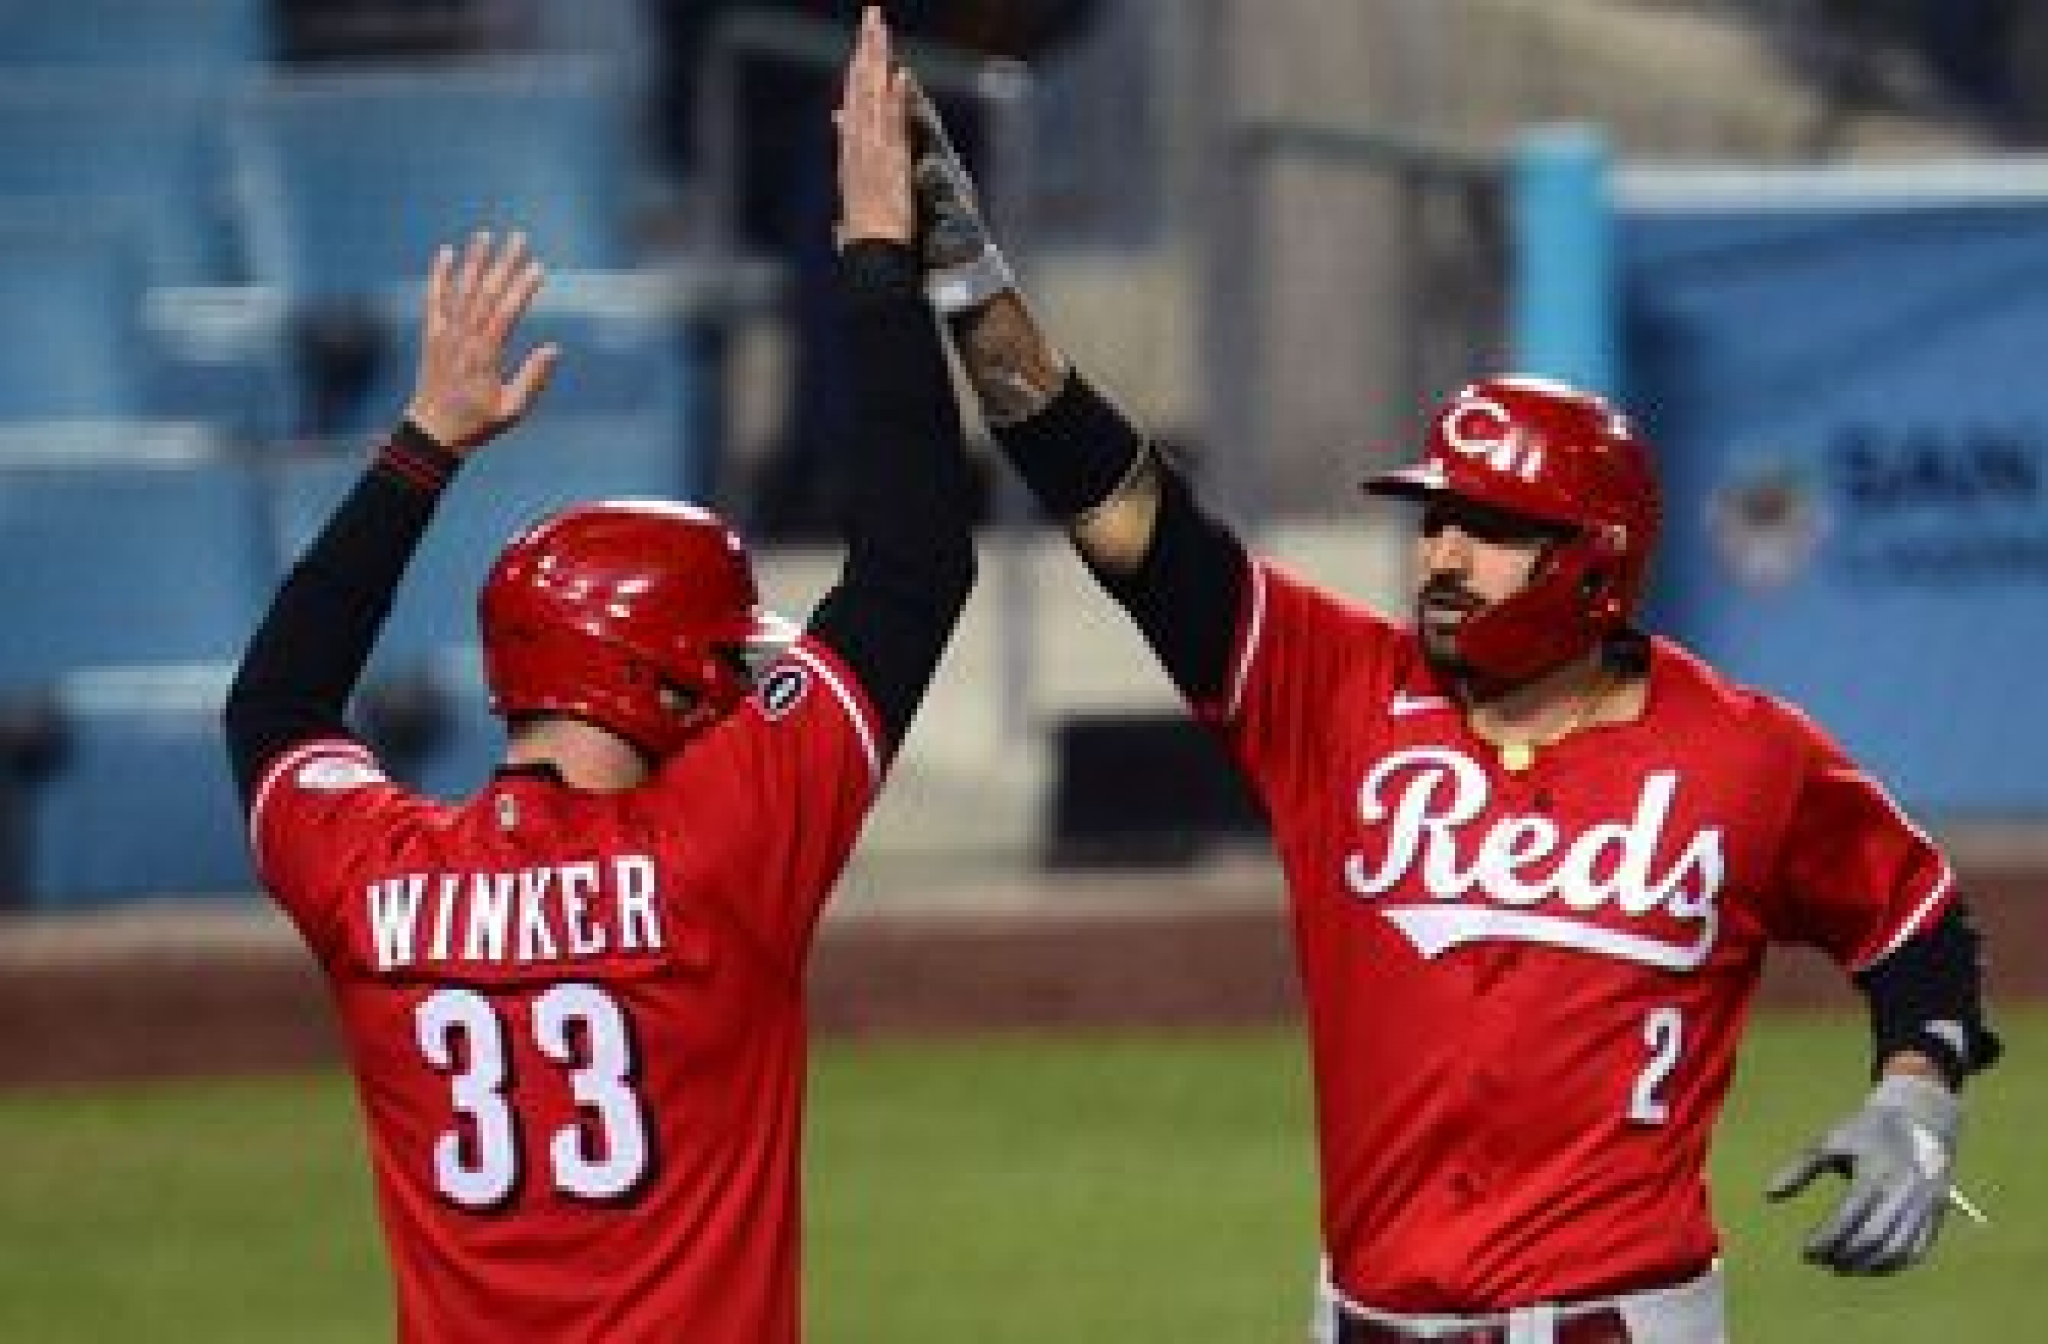 Jesse Winker goes 3-for-5 with two RBI and a homer as Reds edge Dodgers, 6-5